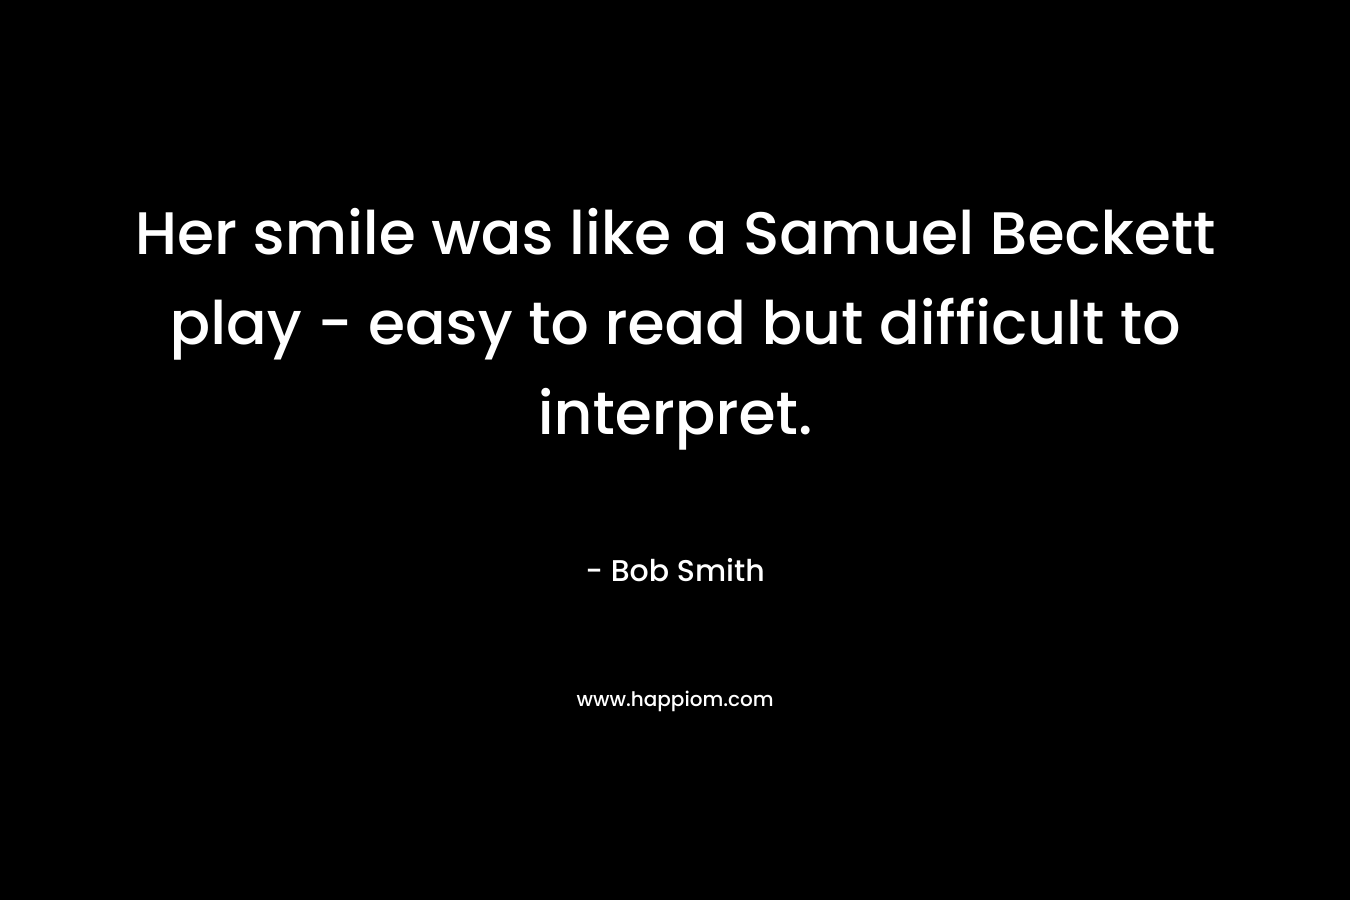 Her smile was like a Samuel Beckett play - easy to read but difficult to interpret.